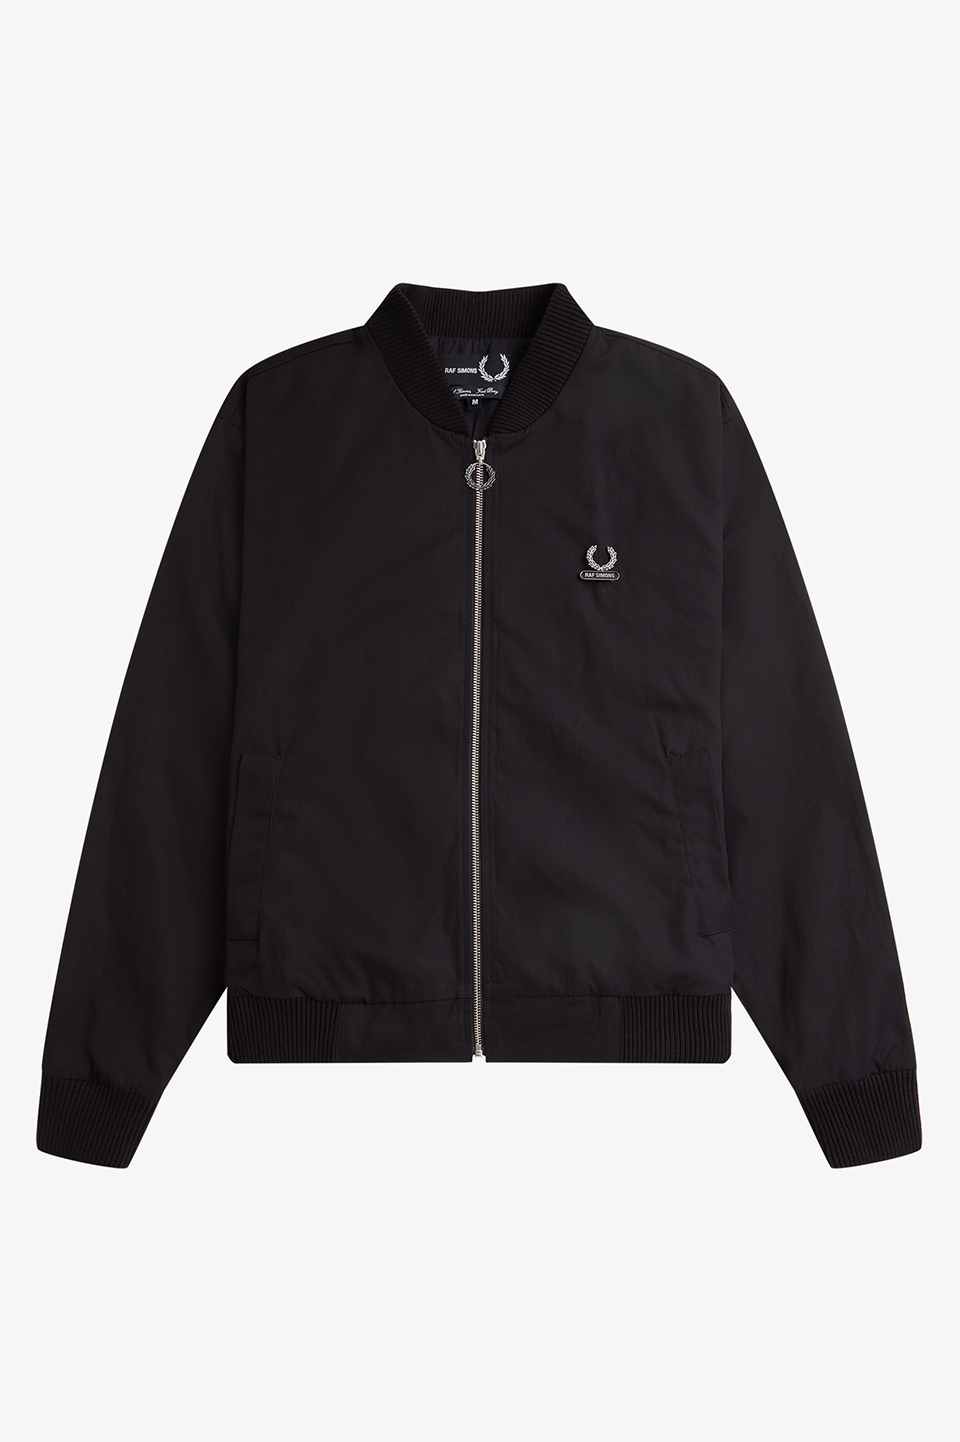 Raf Simons Printed Bomber Jacket(S 102：BLACK): | FRED PERRY